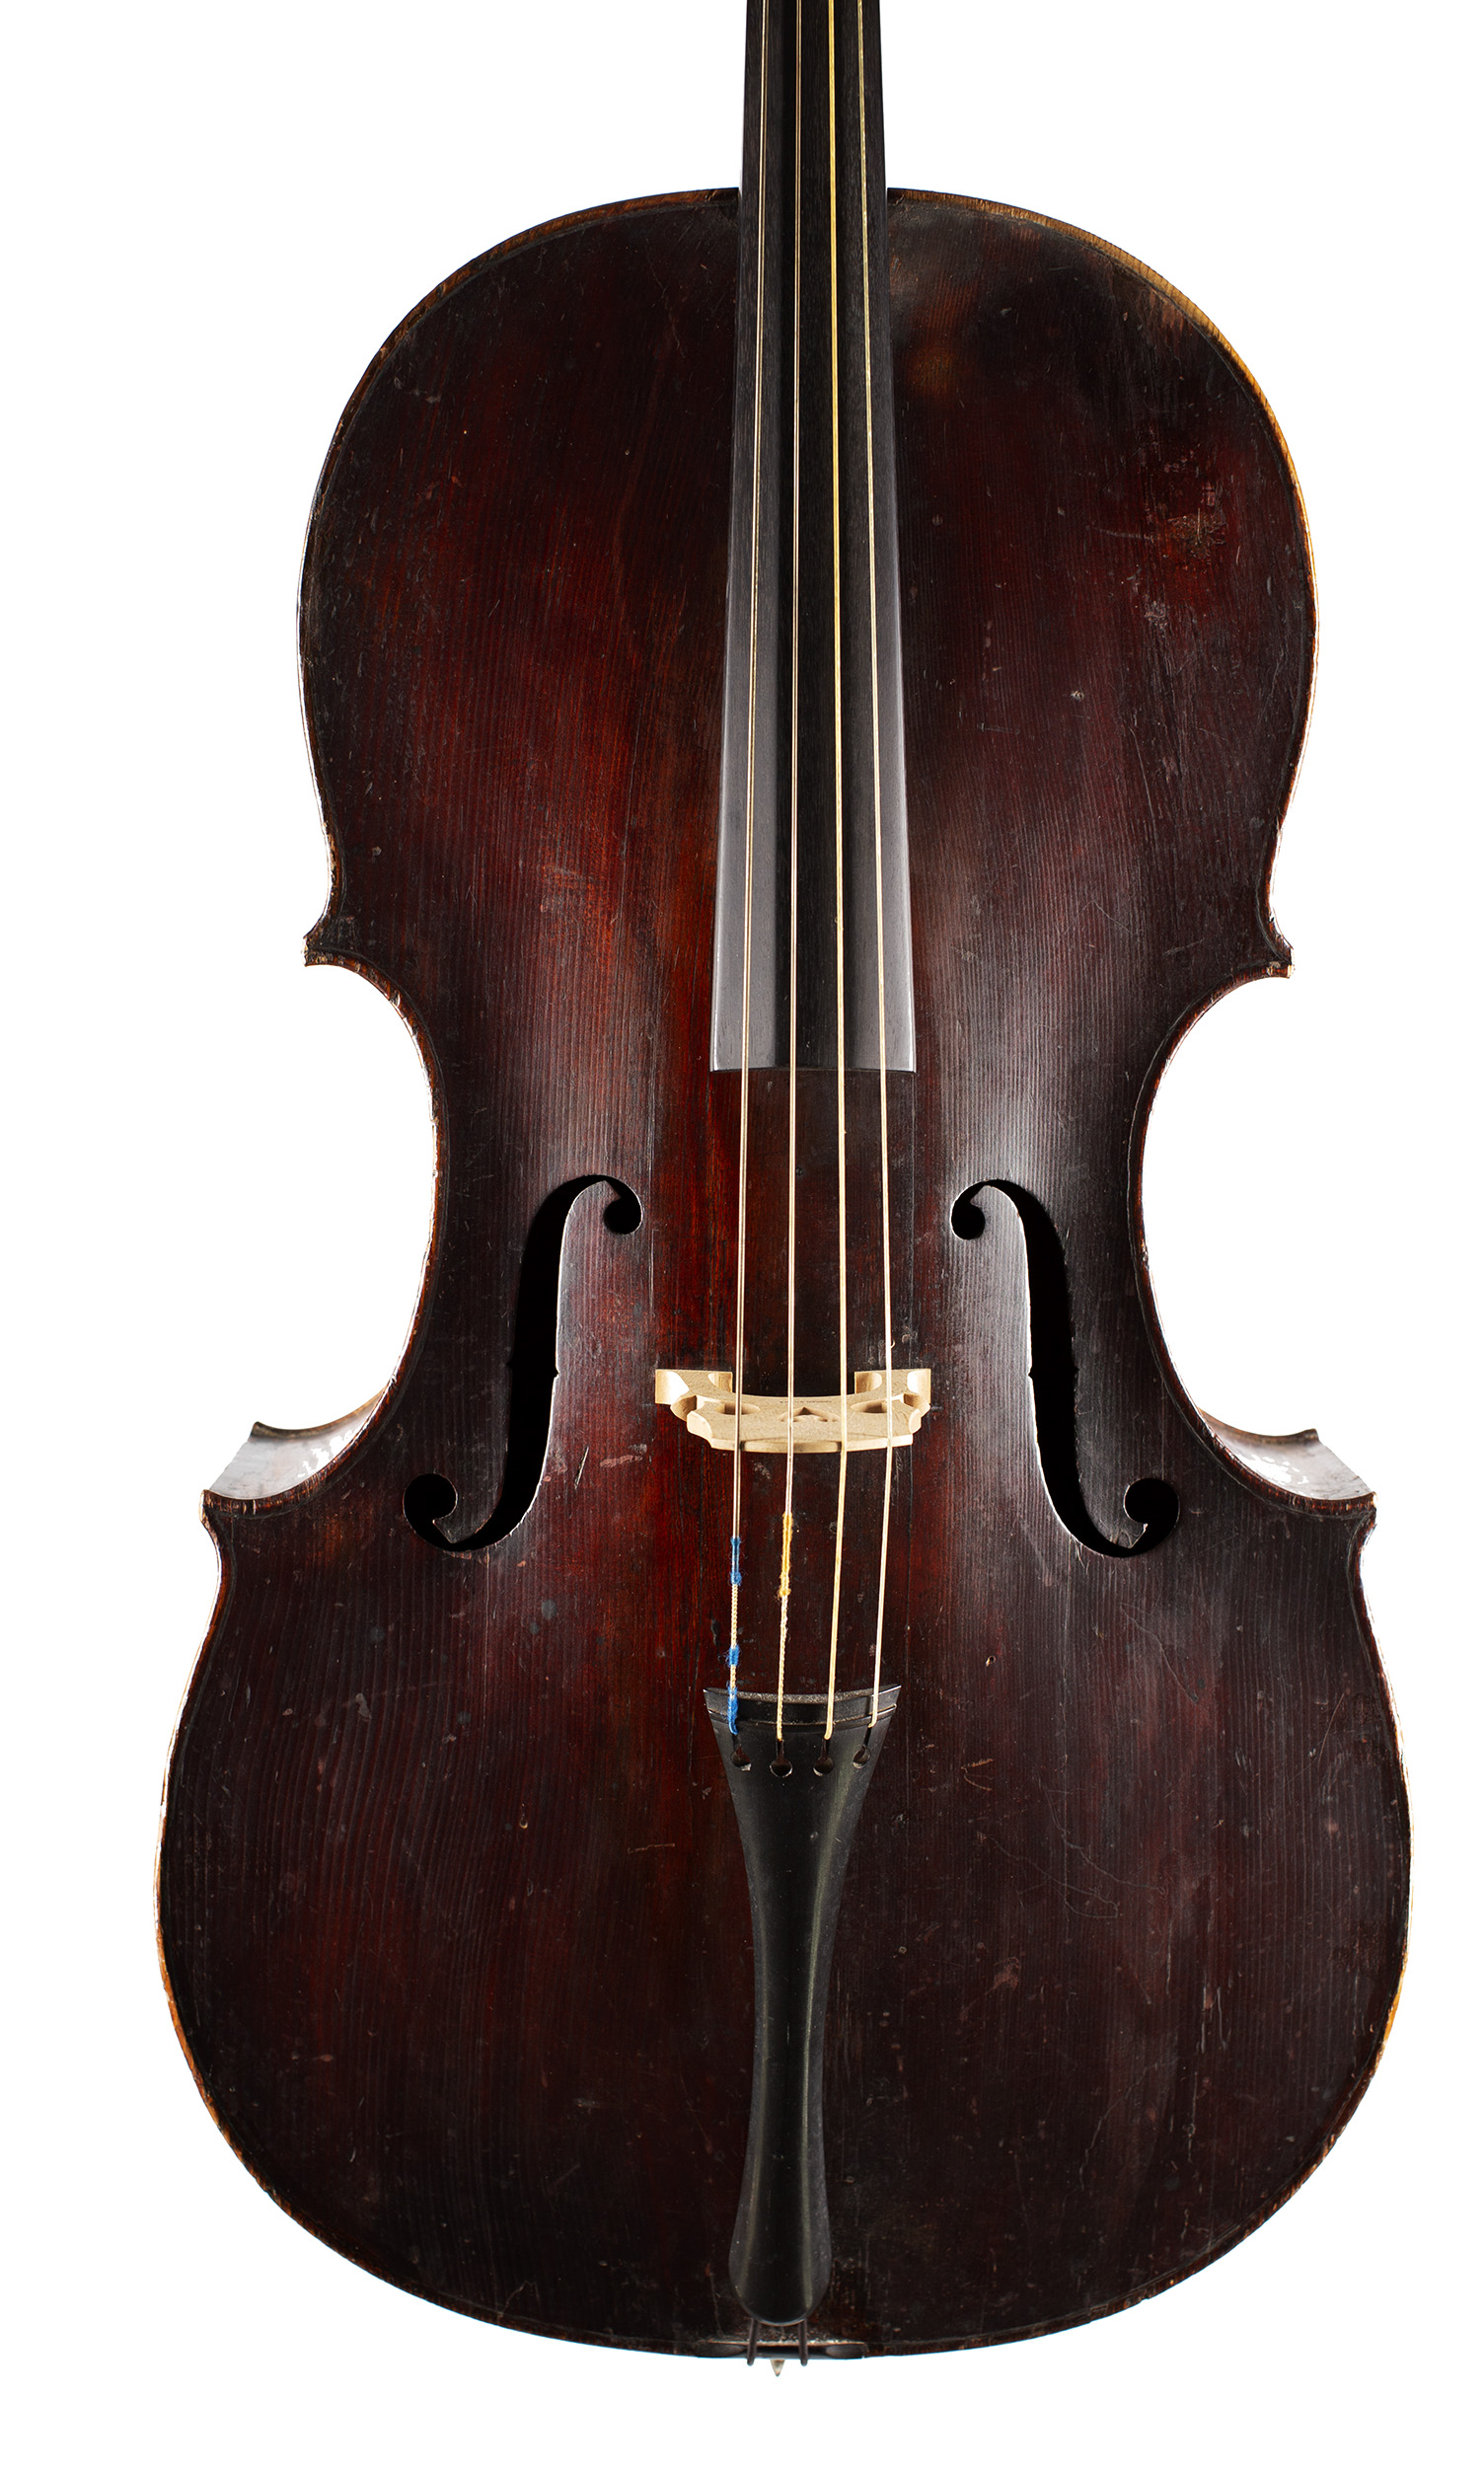 A cello by William Forster (Old Forster), London, circa 1790